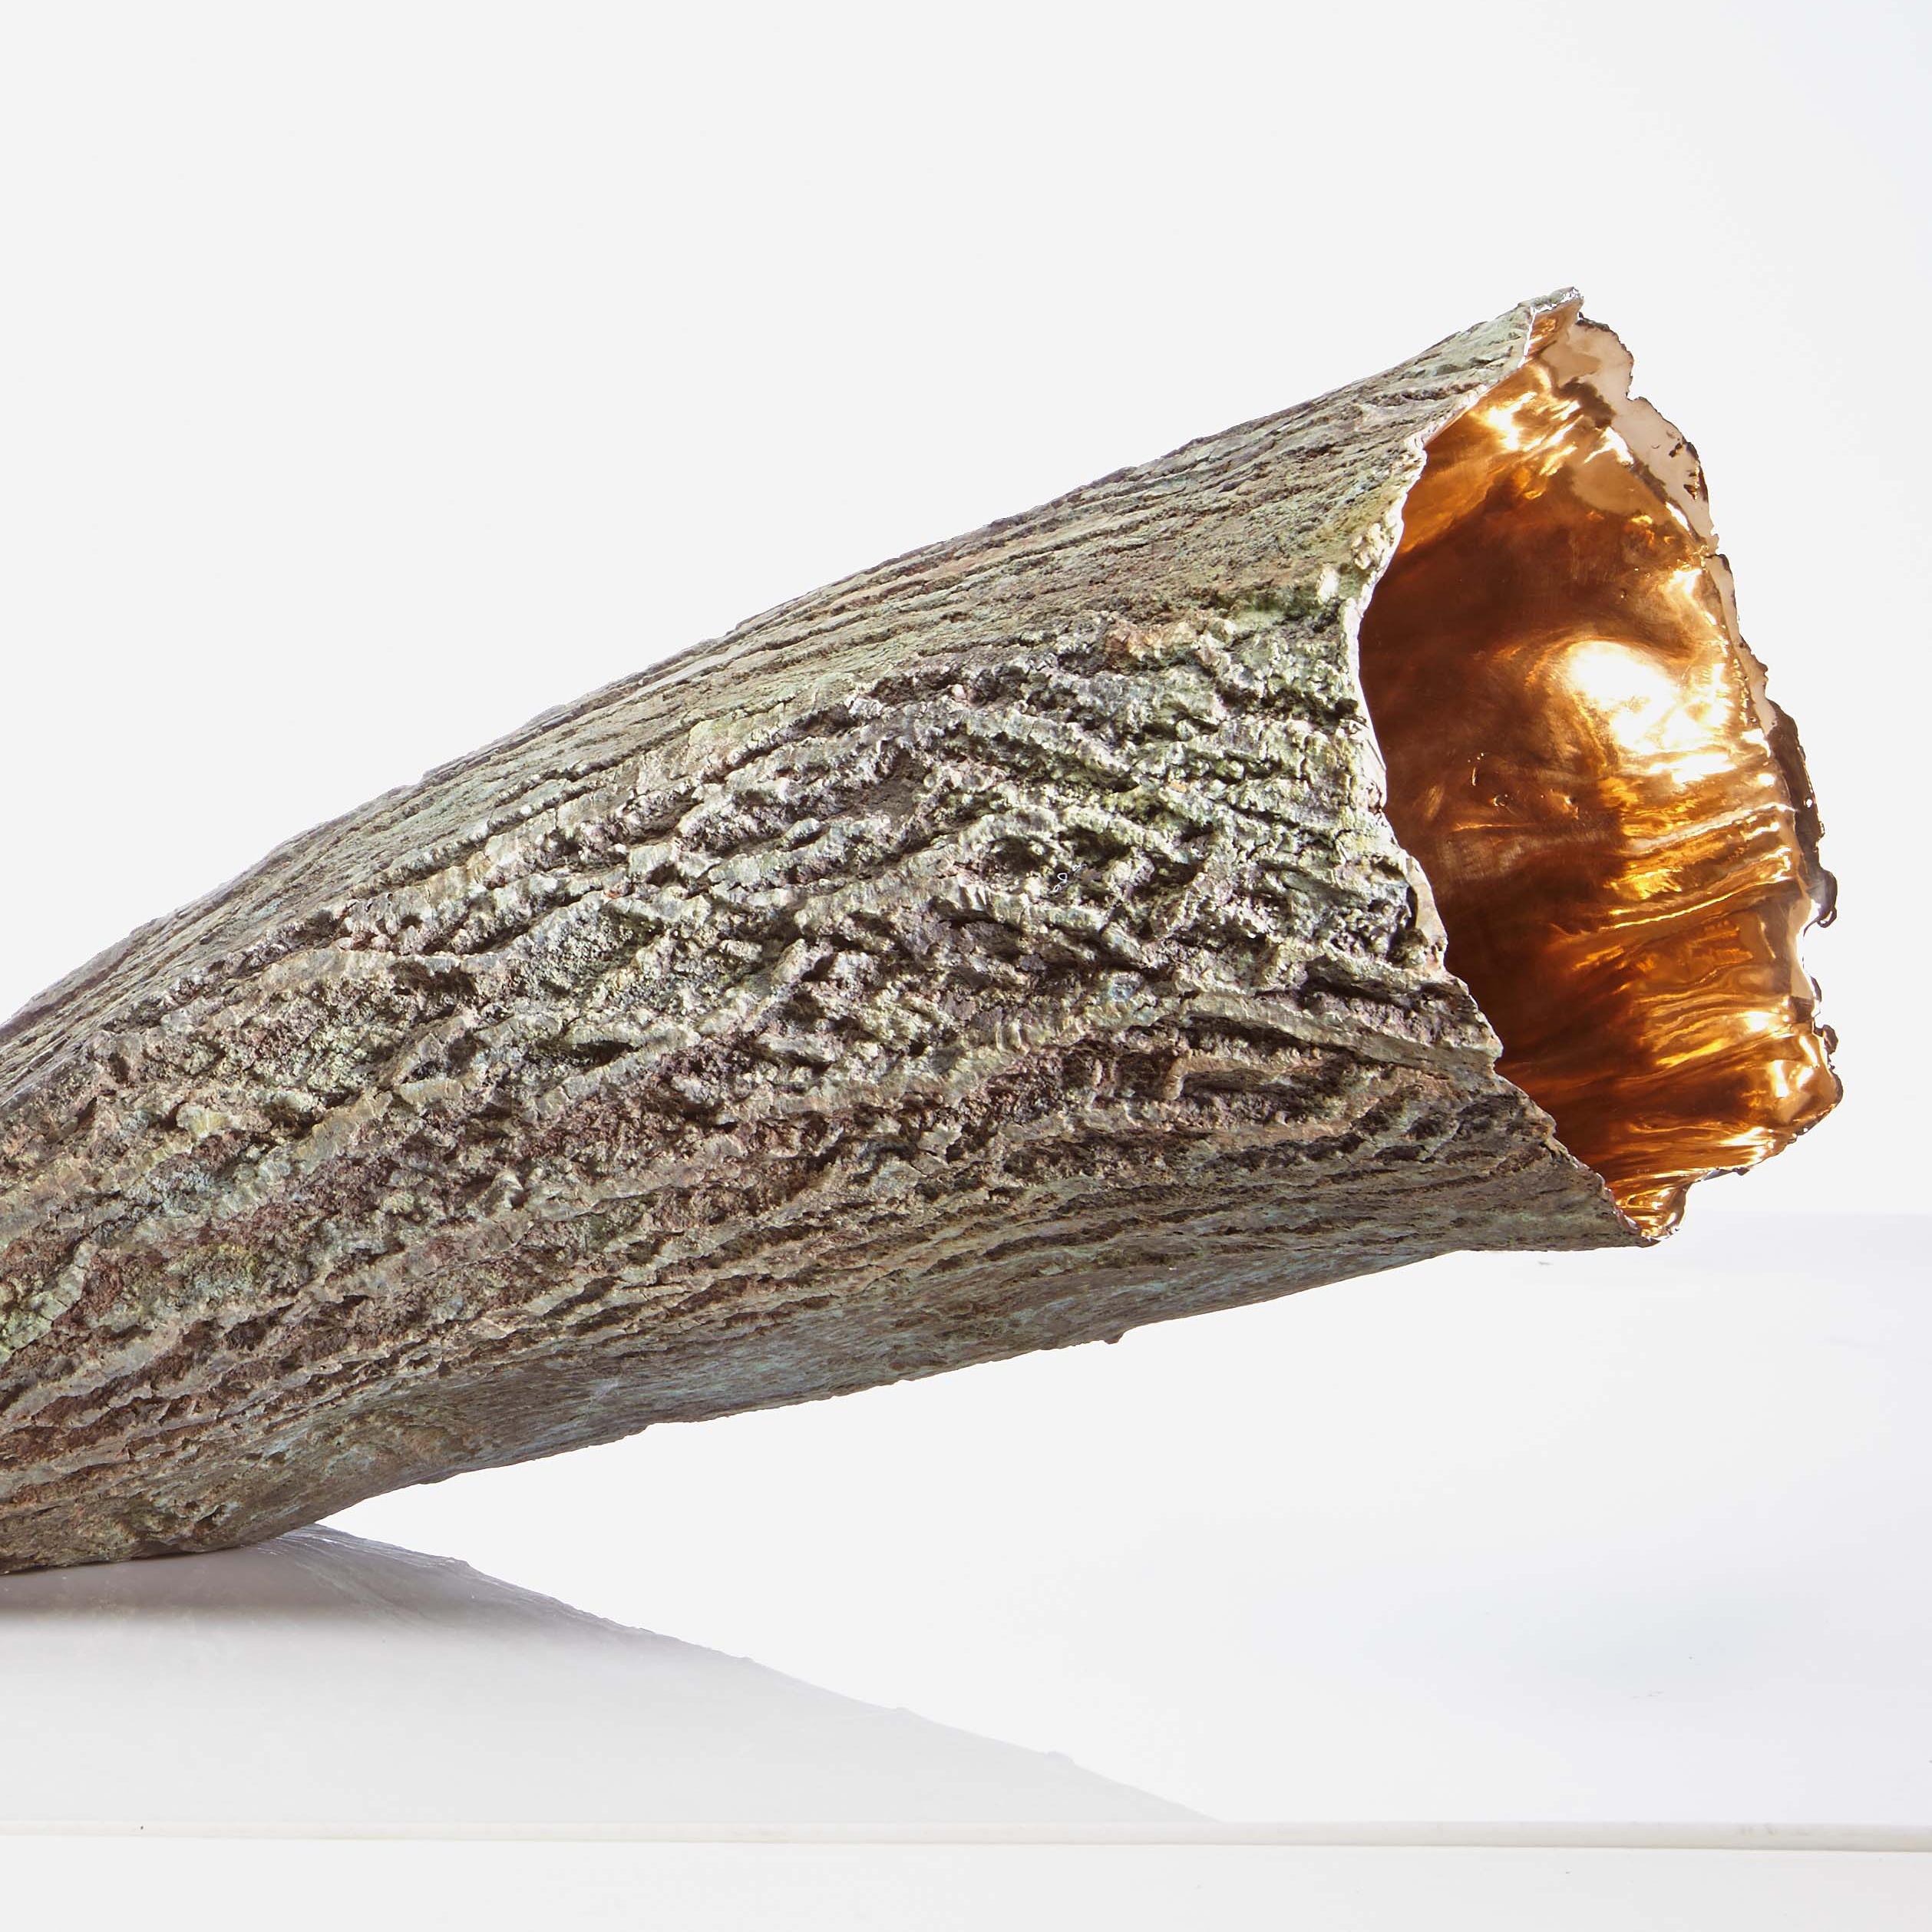 Container by Romain Langlois - Wood-like sculpture, golden bronze interior For Sale 2